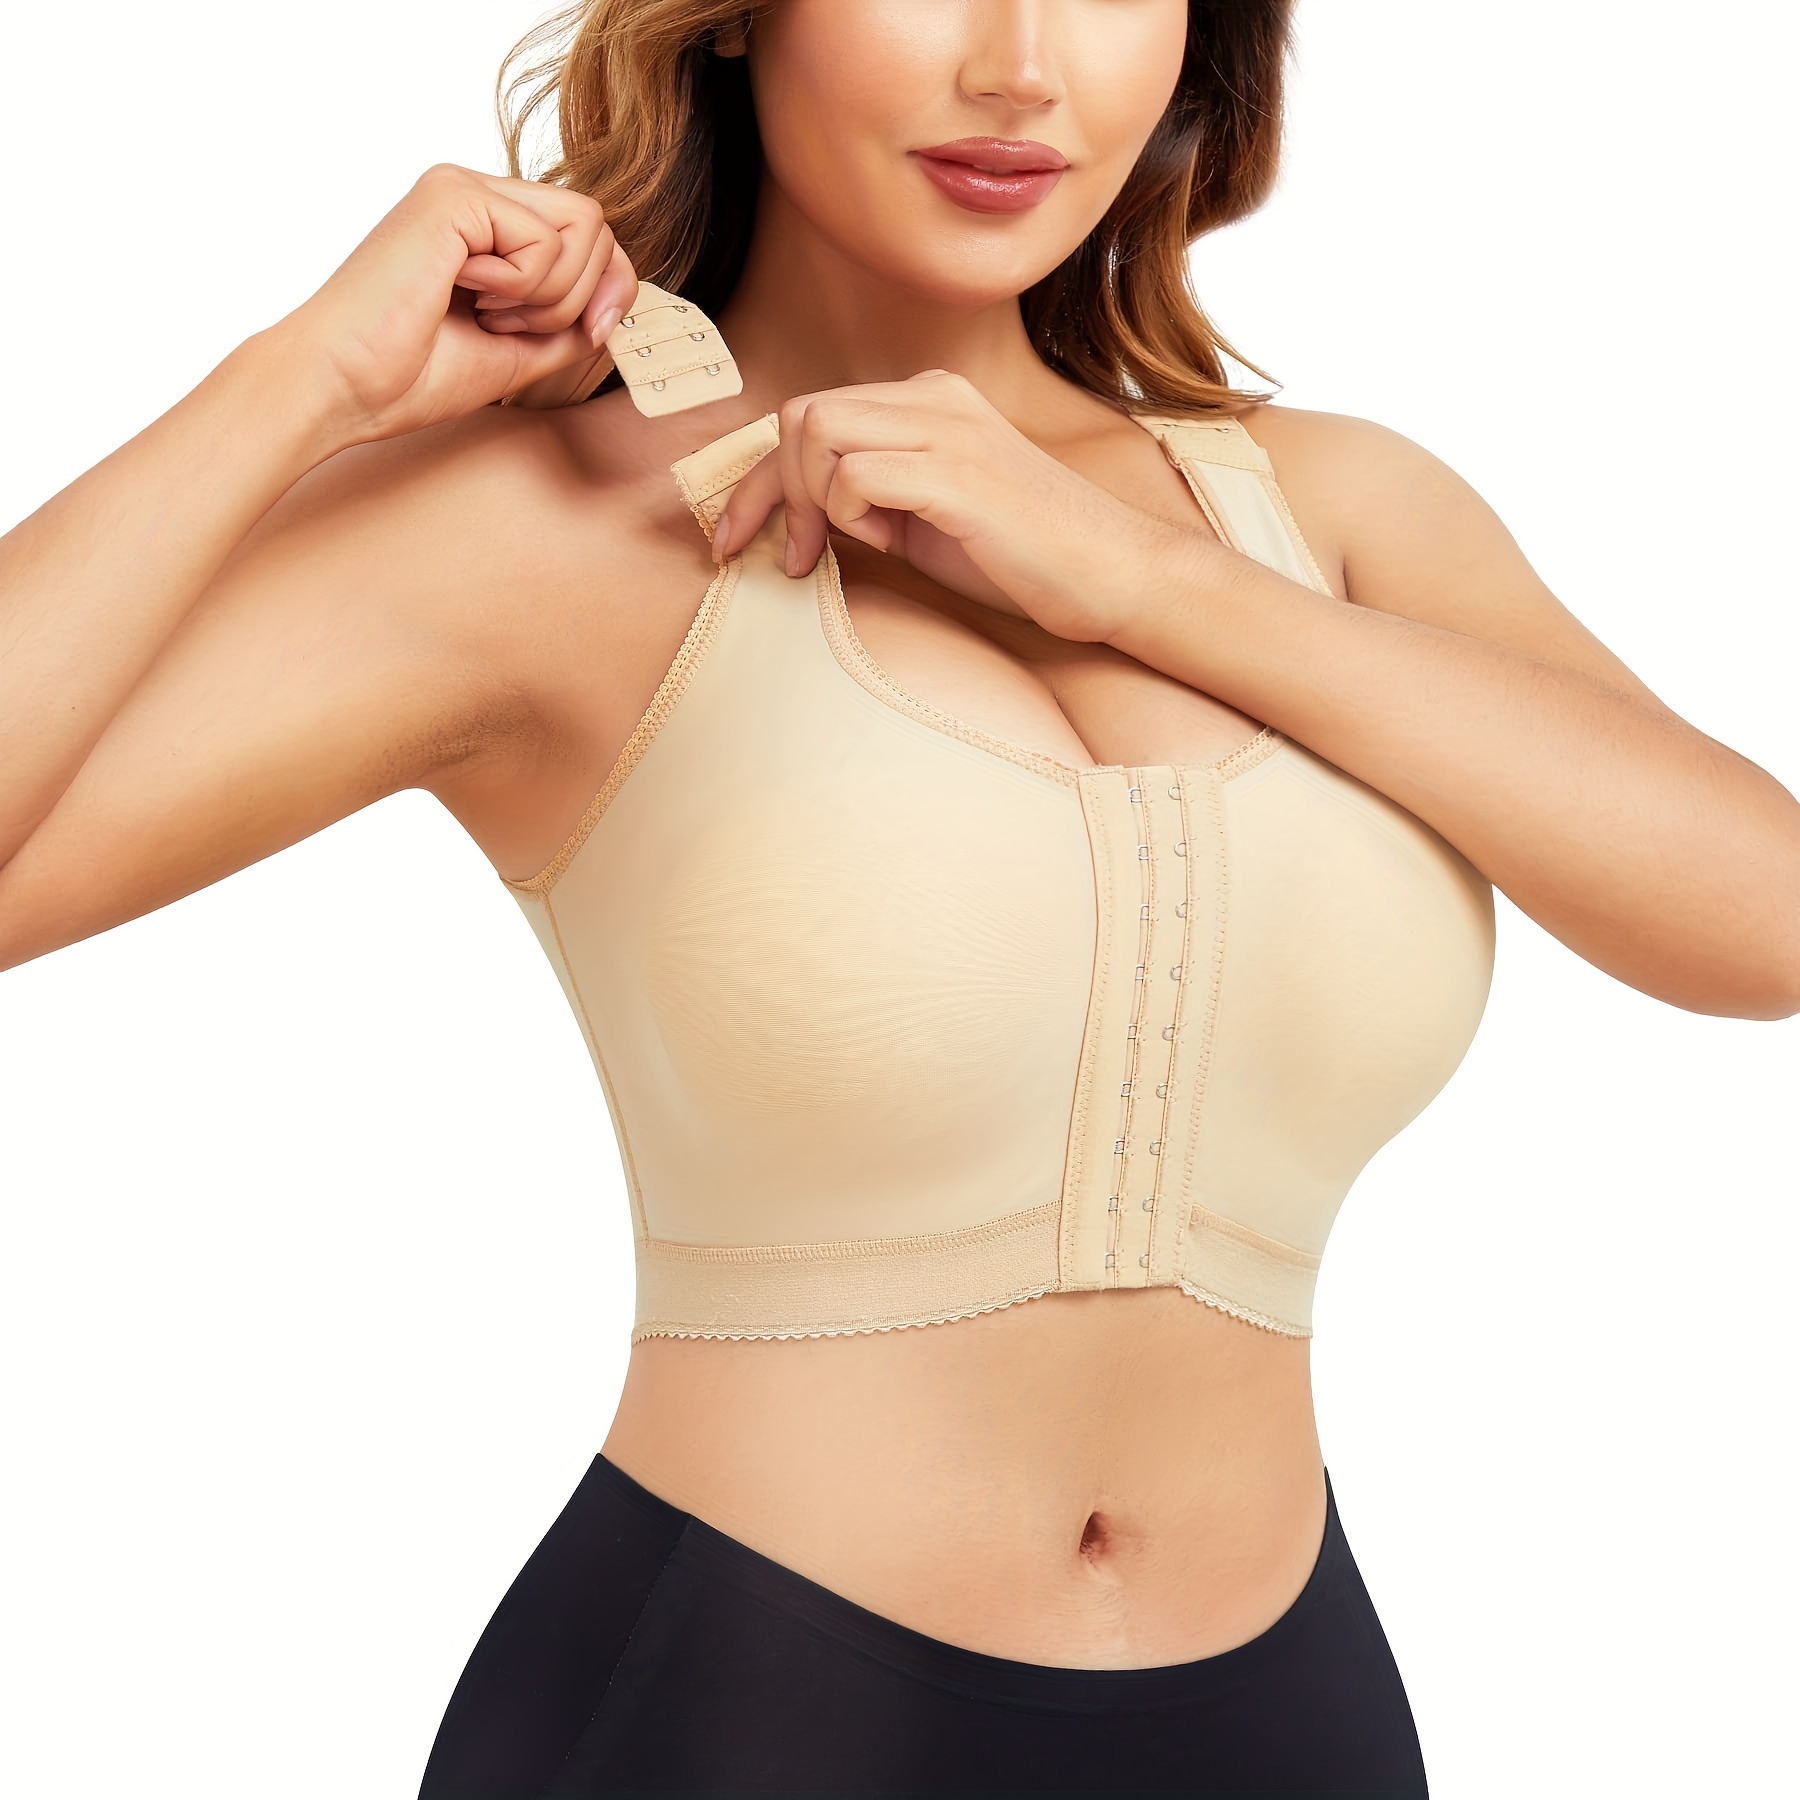 Women's Wirefree Bralettes Back Support Pusture Correcting Full